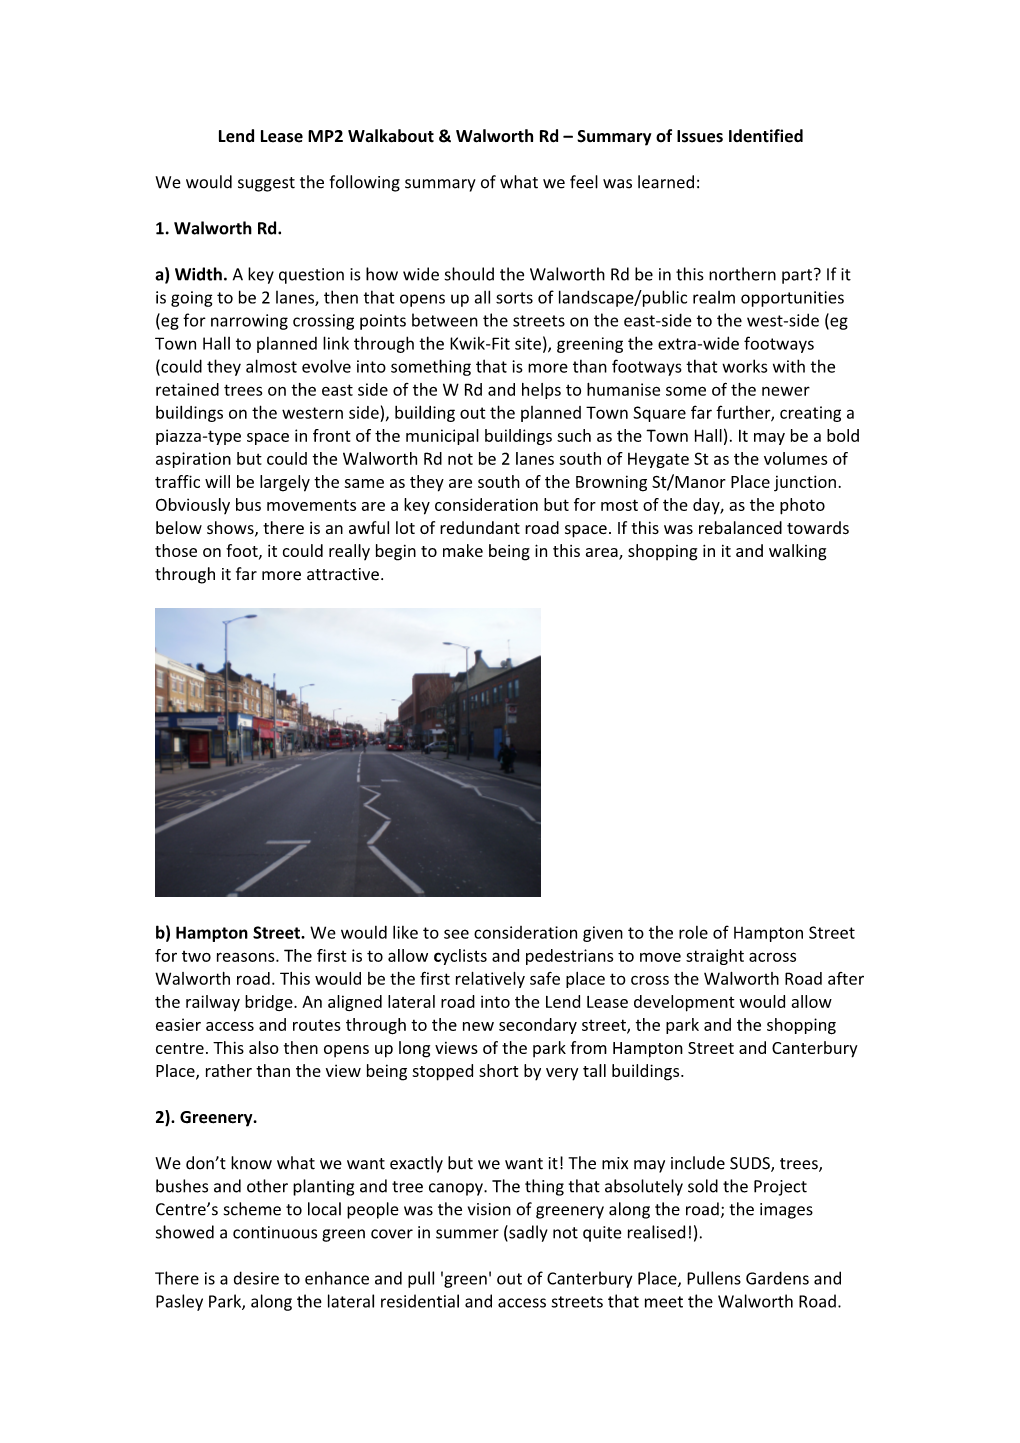 Lend Lease MP2 Walkabout & Walworth Rd Summary of Issues Identified